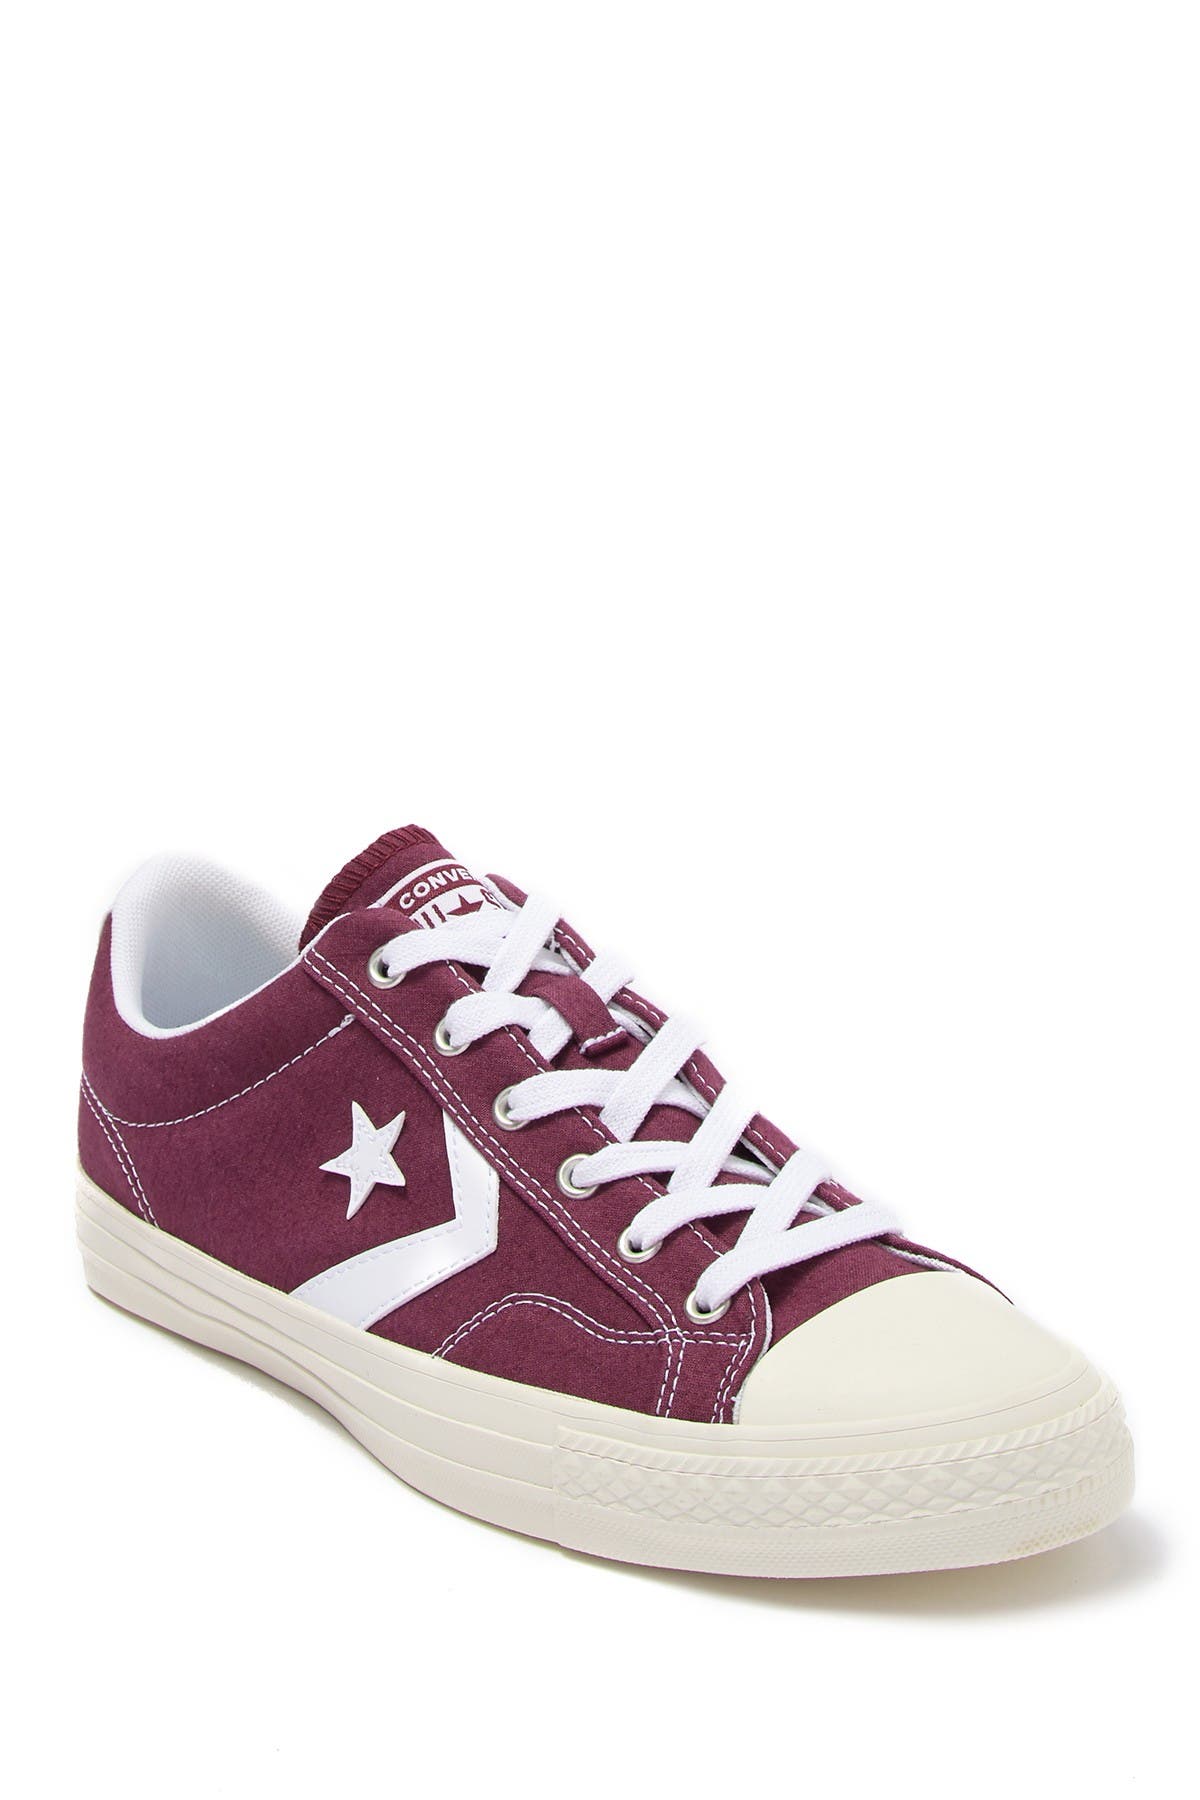 converse lifestyle star player ox